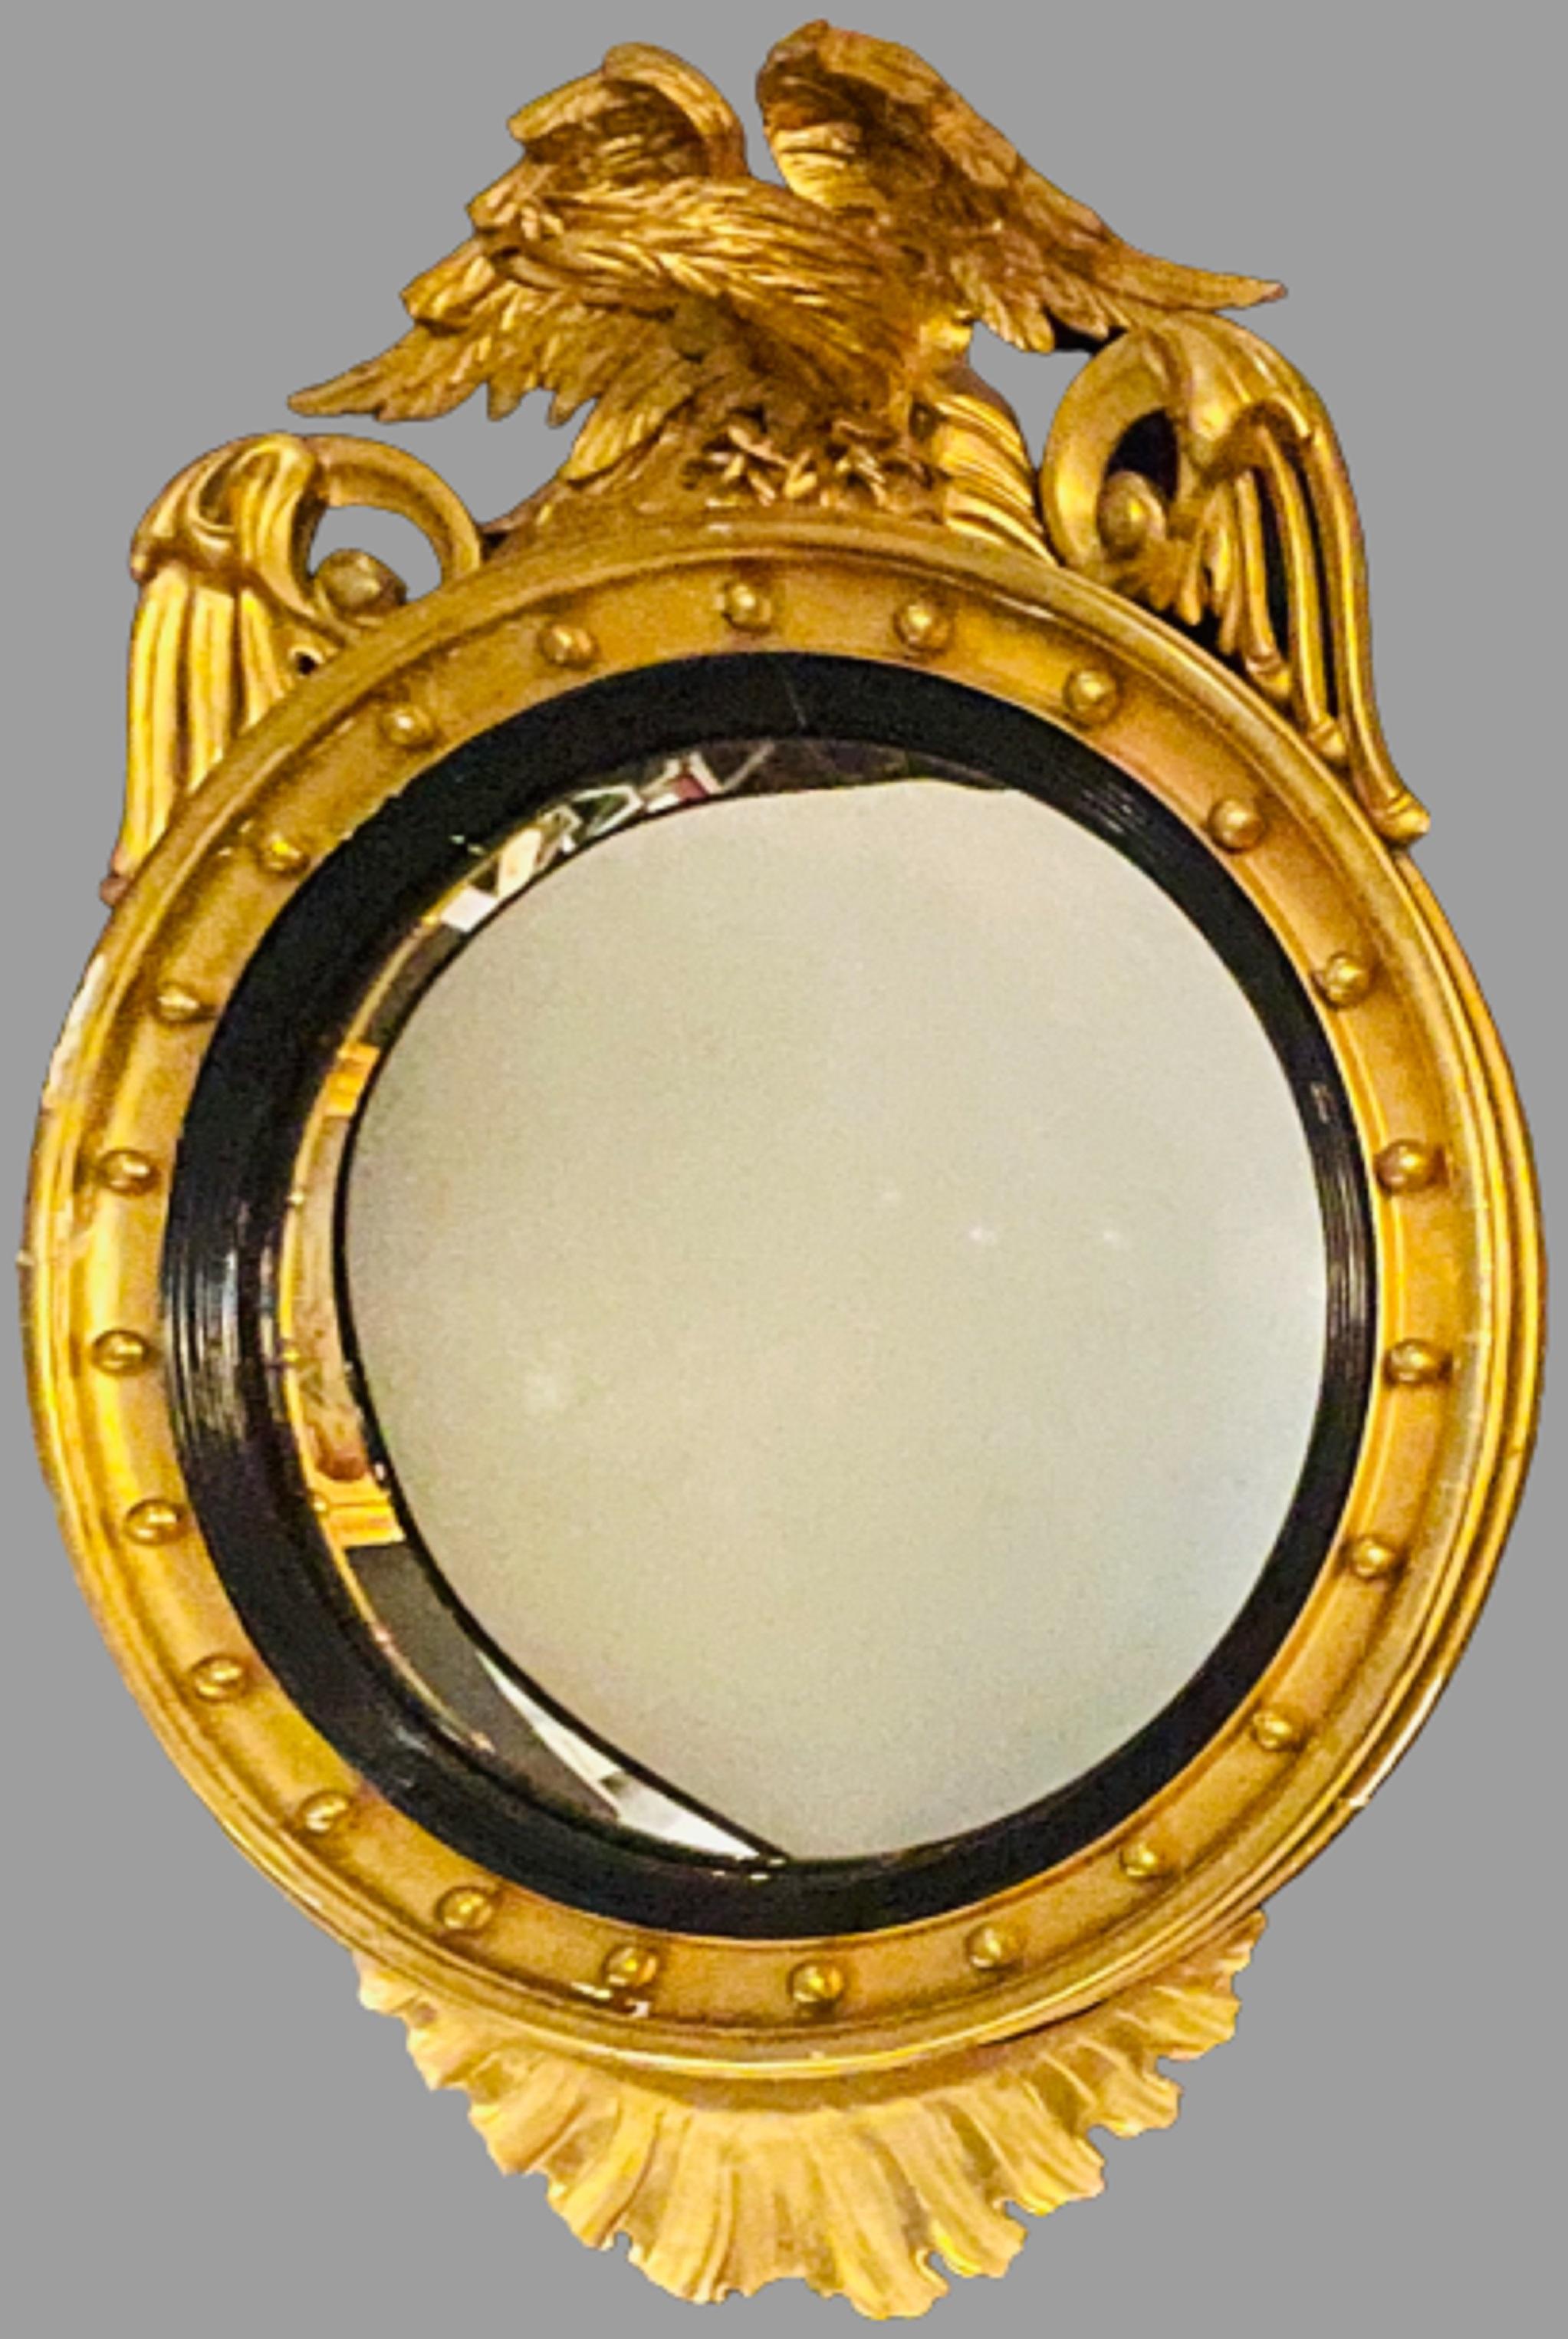 A Federal style gilt gold convex
Wall mirror. Wall, console or pier mirror that is simply stunning. This large and impressive gilt gold mirror has a convex or bowed center clean mirror flanked in a giltwood frame done in the Federal style. The